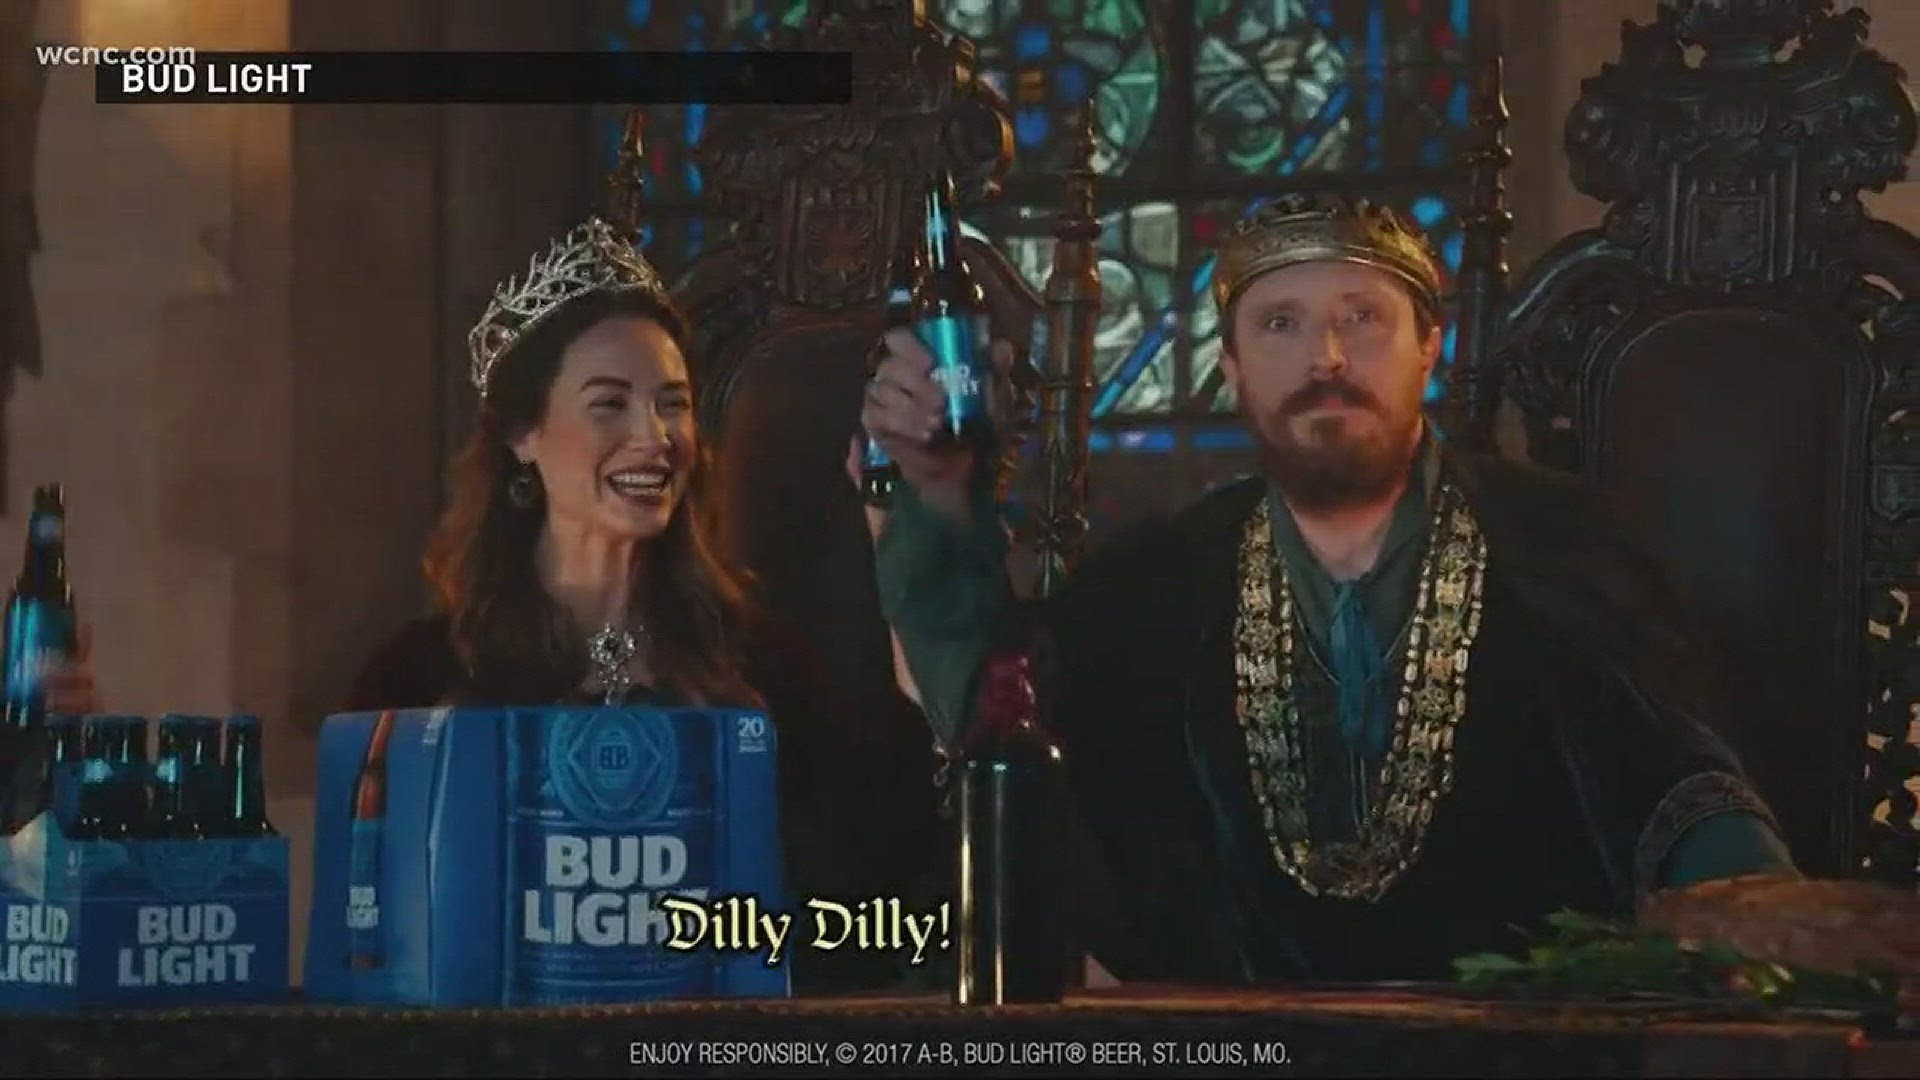 It's the catchphrase that captured the entire nation. It turns out the star, who's becoming known as the "Dilly Dilly King" is a native of the Queen City.